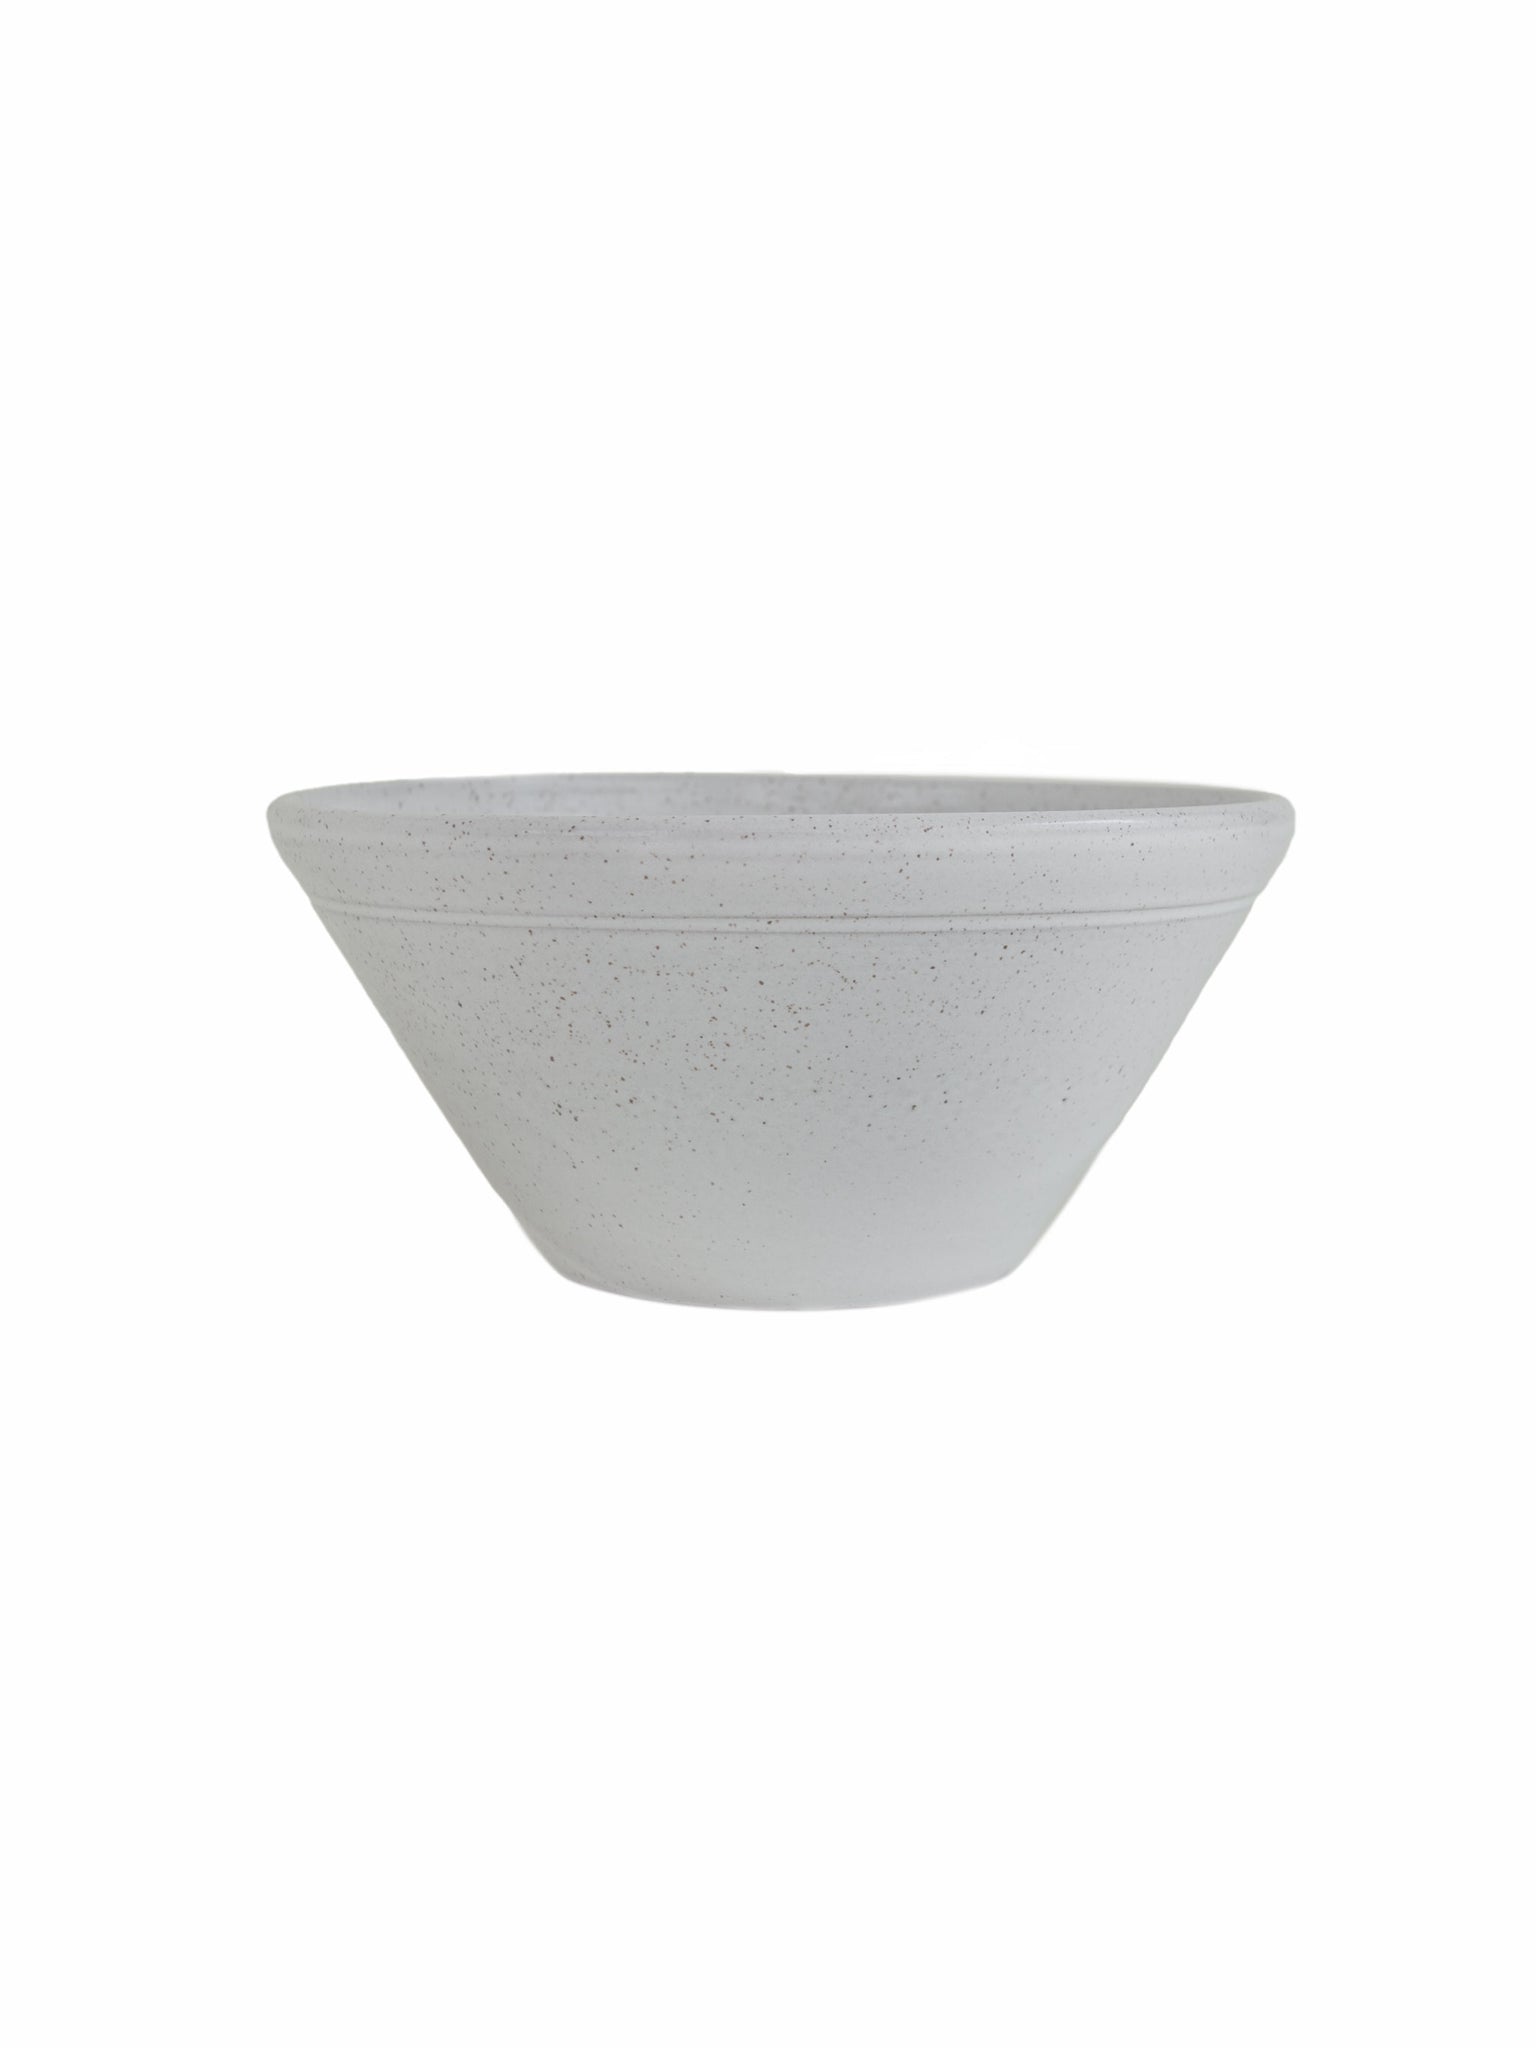 McQueen Pottery Speckled Serving Bowl